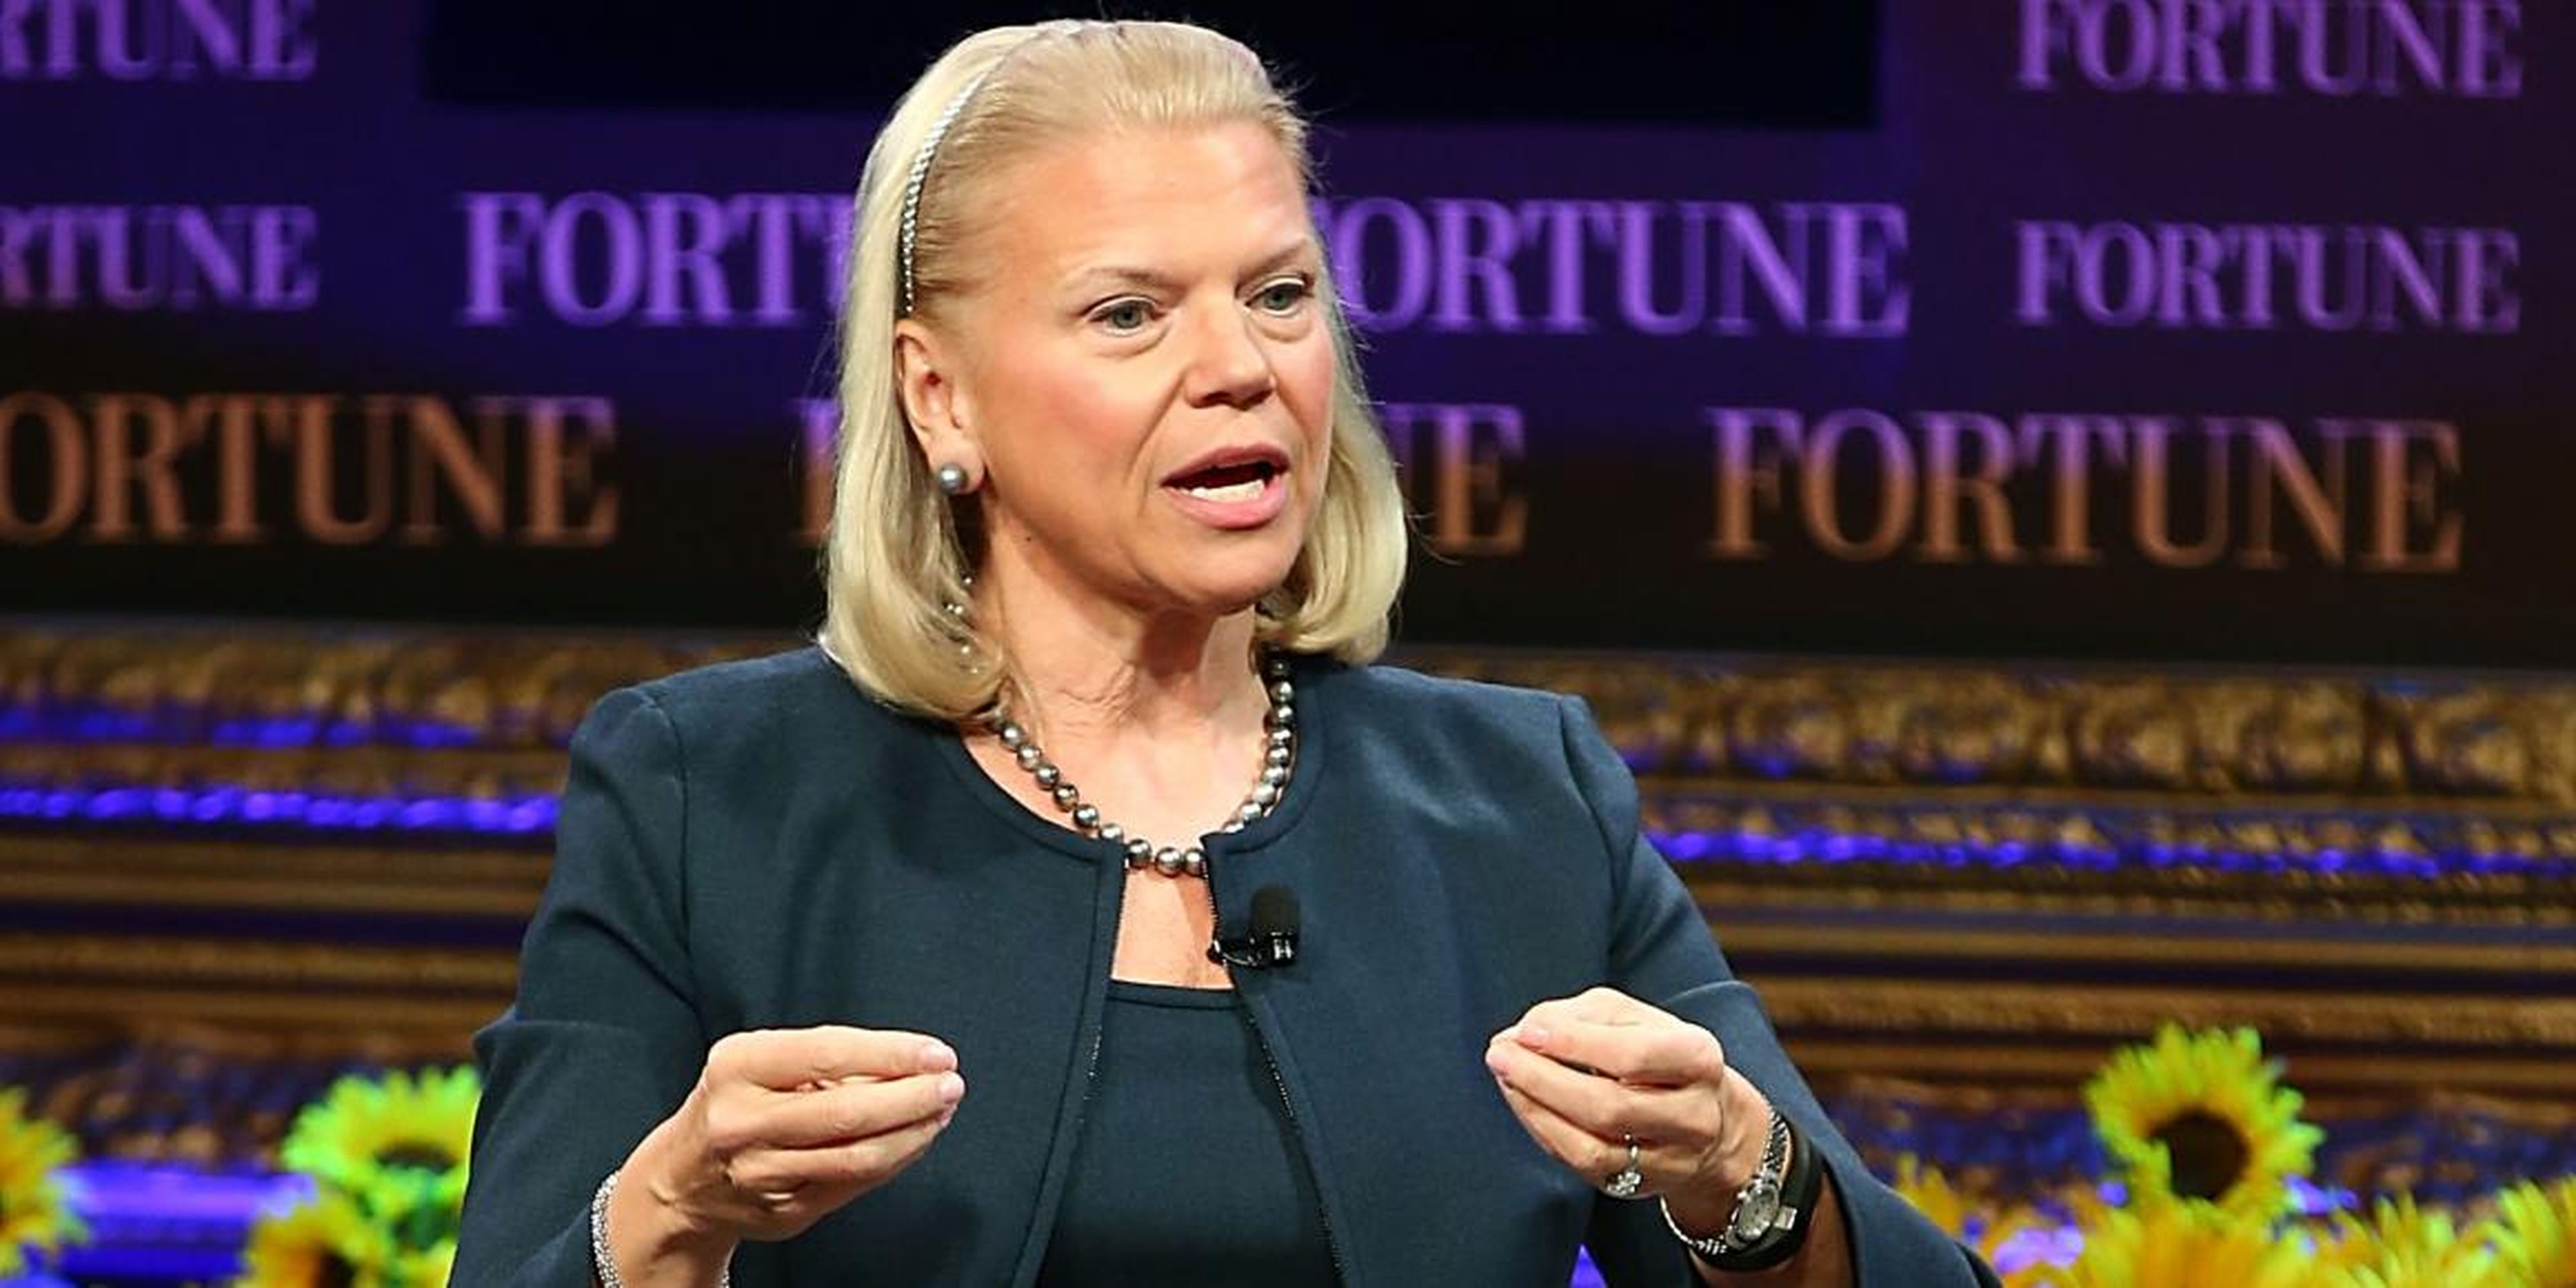 IT'S OFFICIAL: IBM is acquiring software company Red Hat for $34 billion